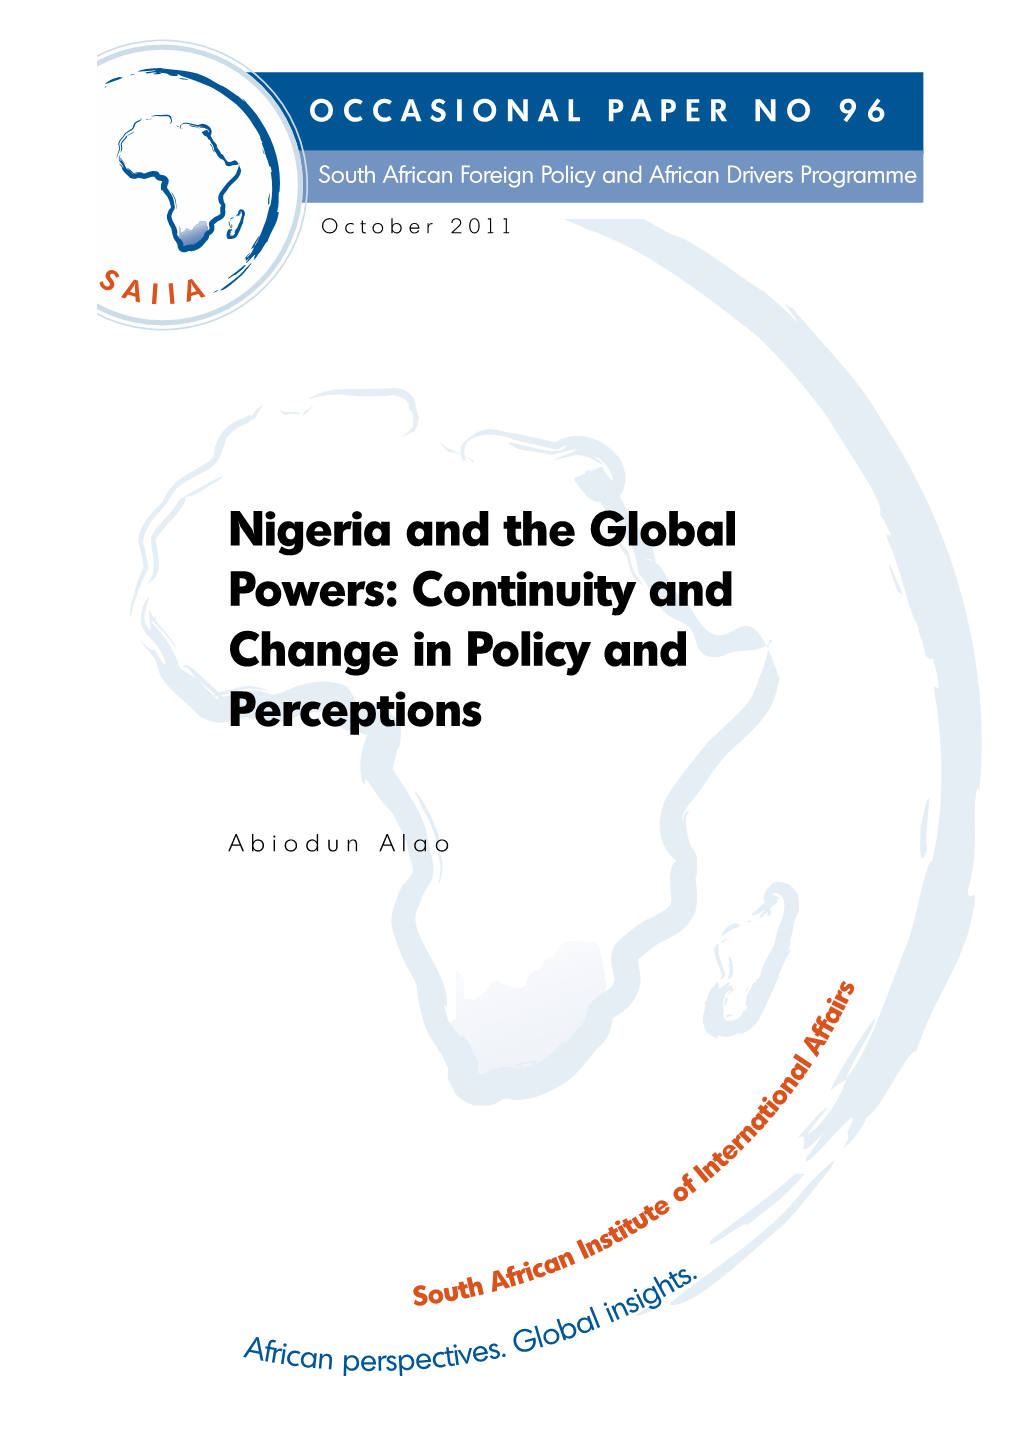 Nigeria and the Global Powers: Continuity and Change in Policy and Perceptions